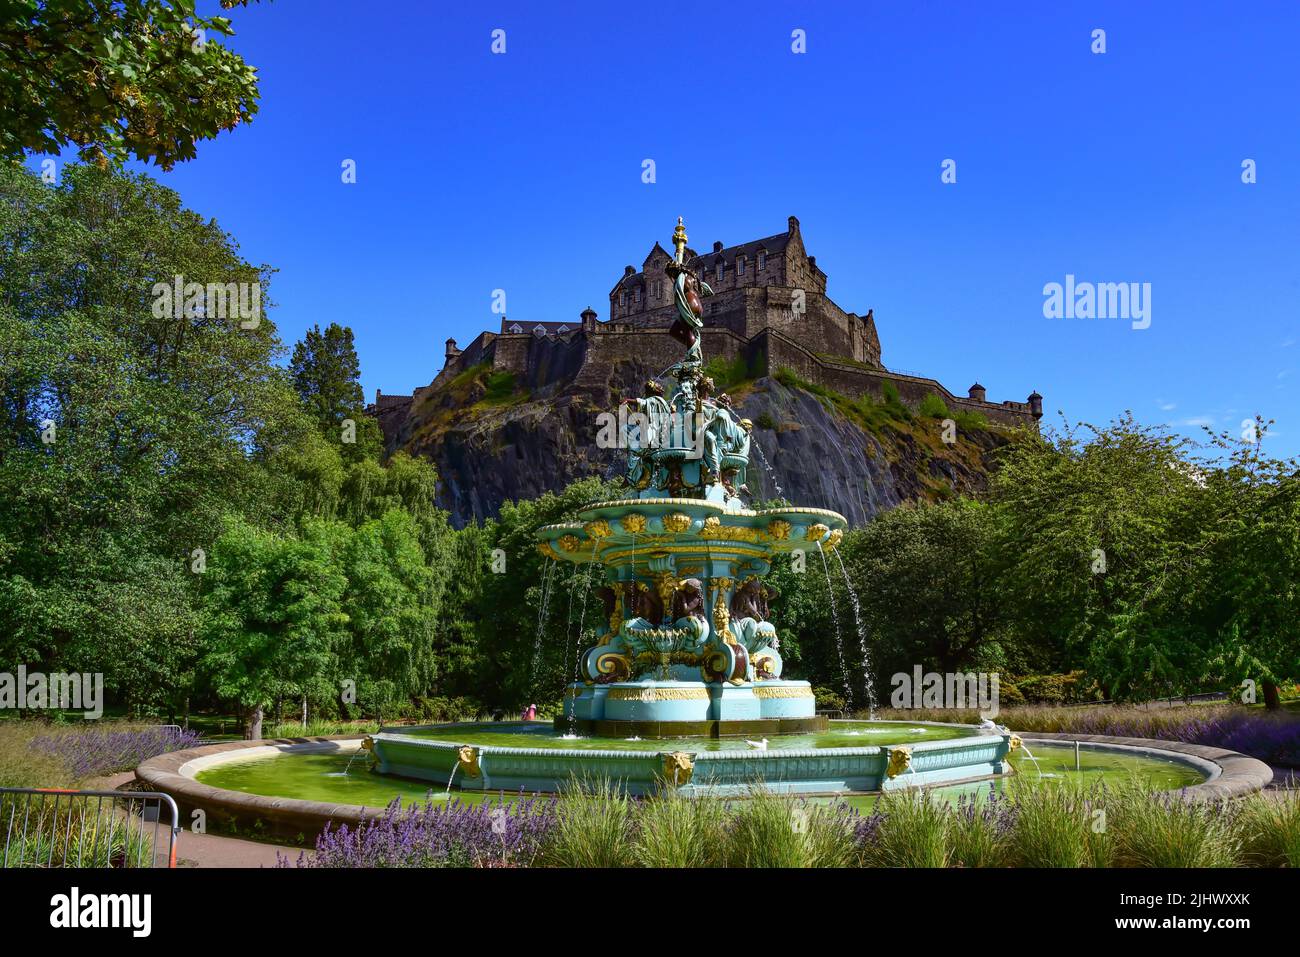 The Ross Fountain in Princess Street Gardens in Edinburgh with the Royal Castle on Castle Rock in the background, Scotland, United Kingdom, Europe Stock Photo